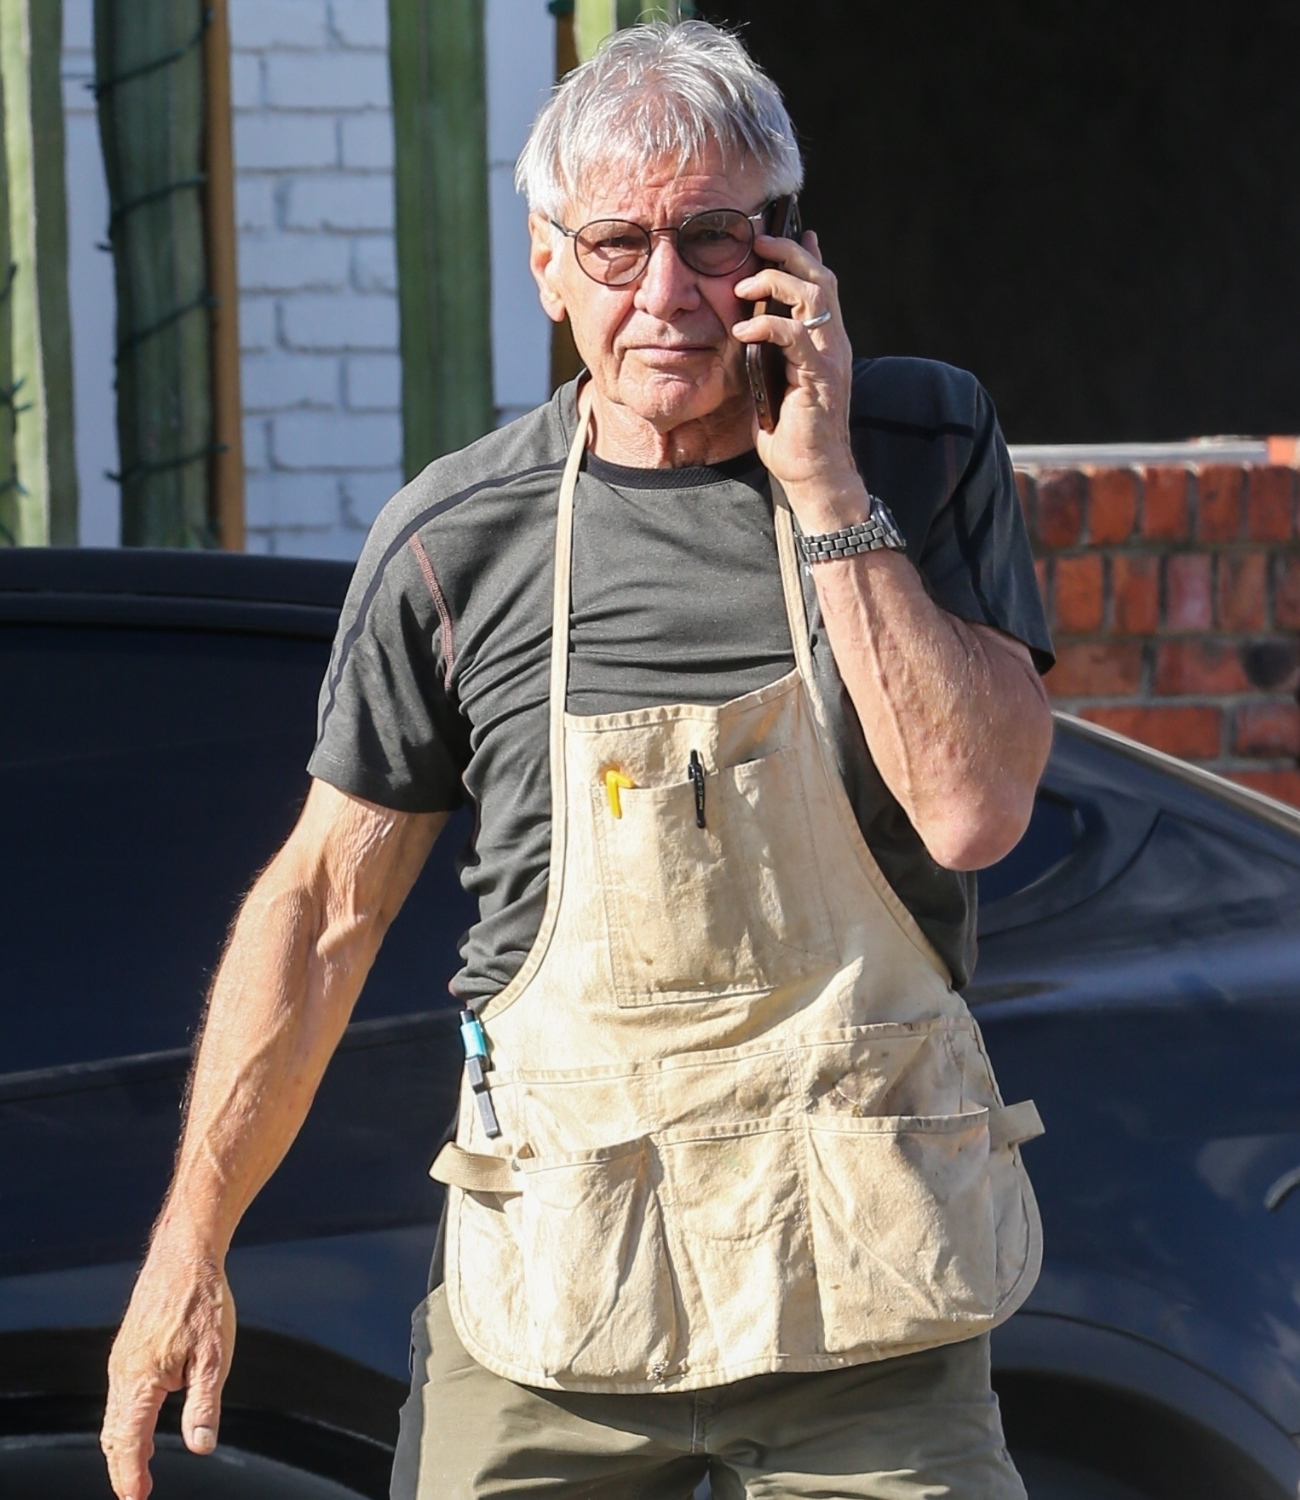 Let Harrison Ford's workwear ensemble be a lesson.